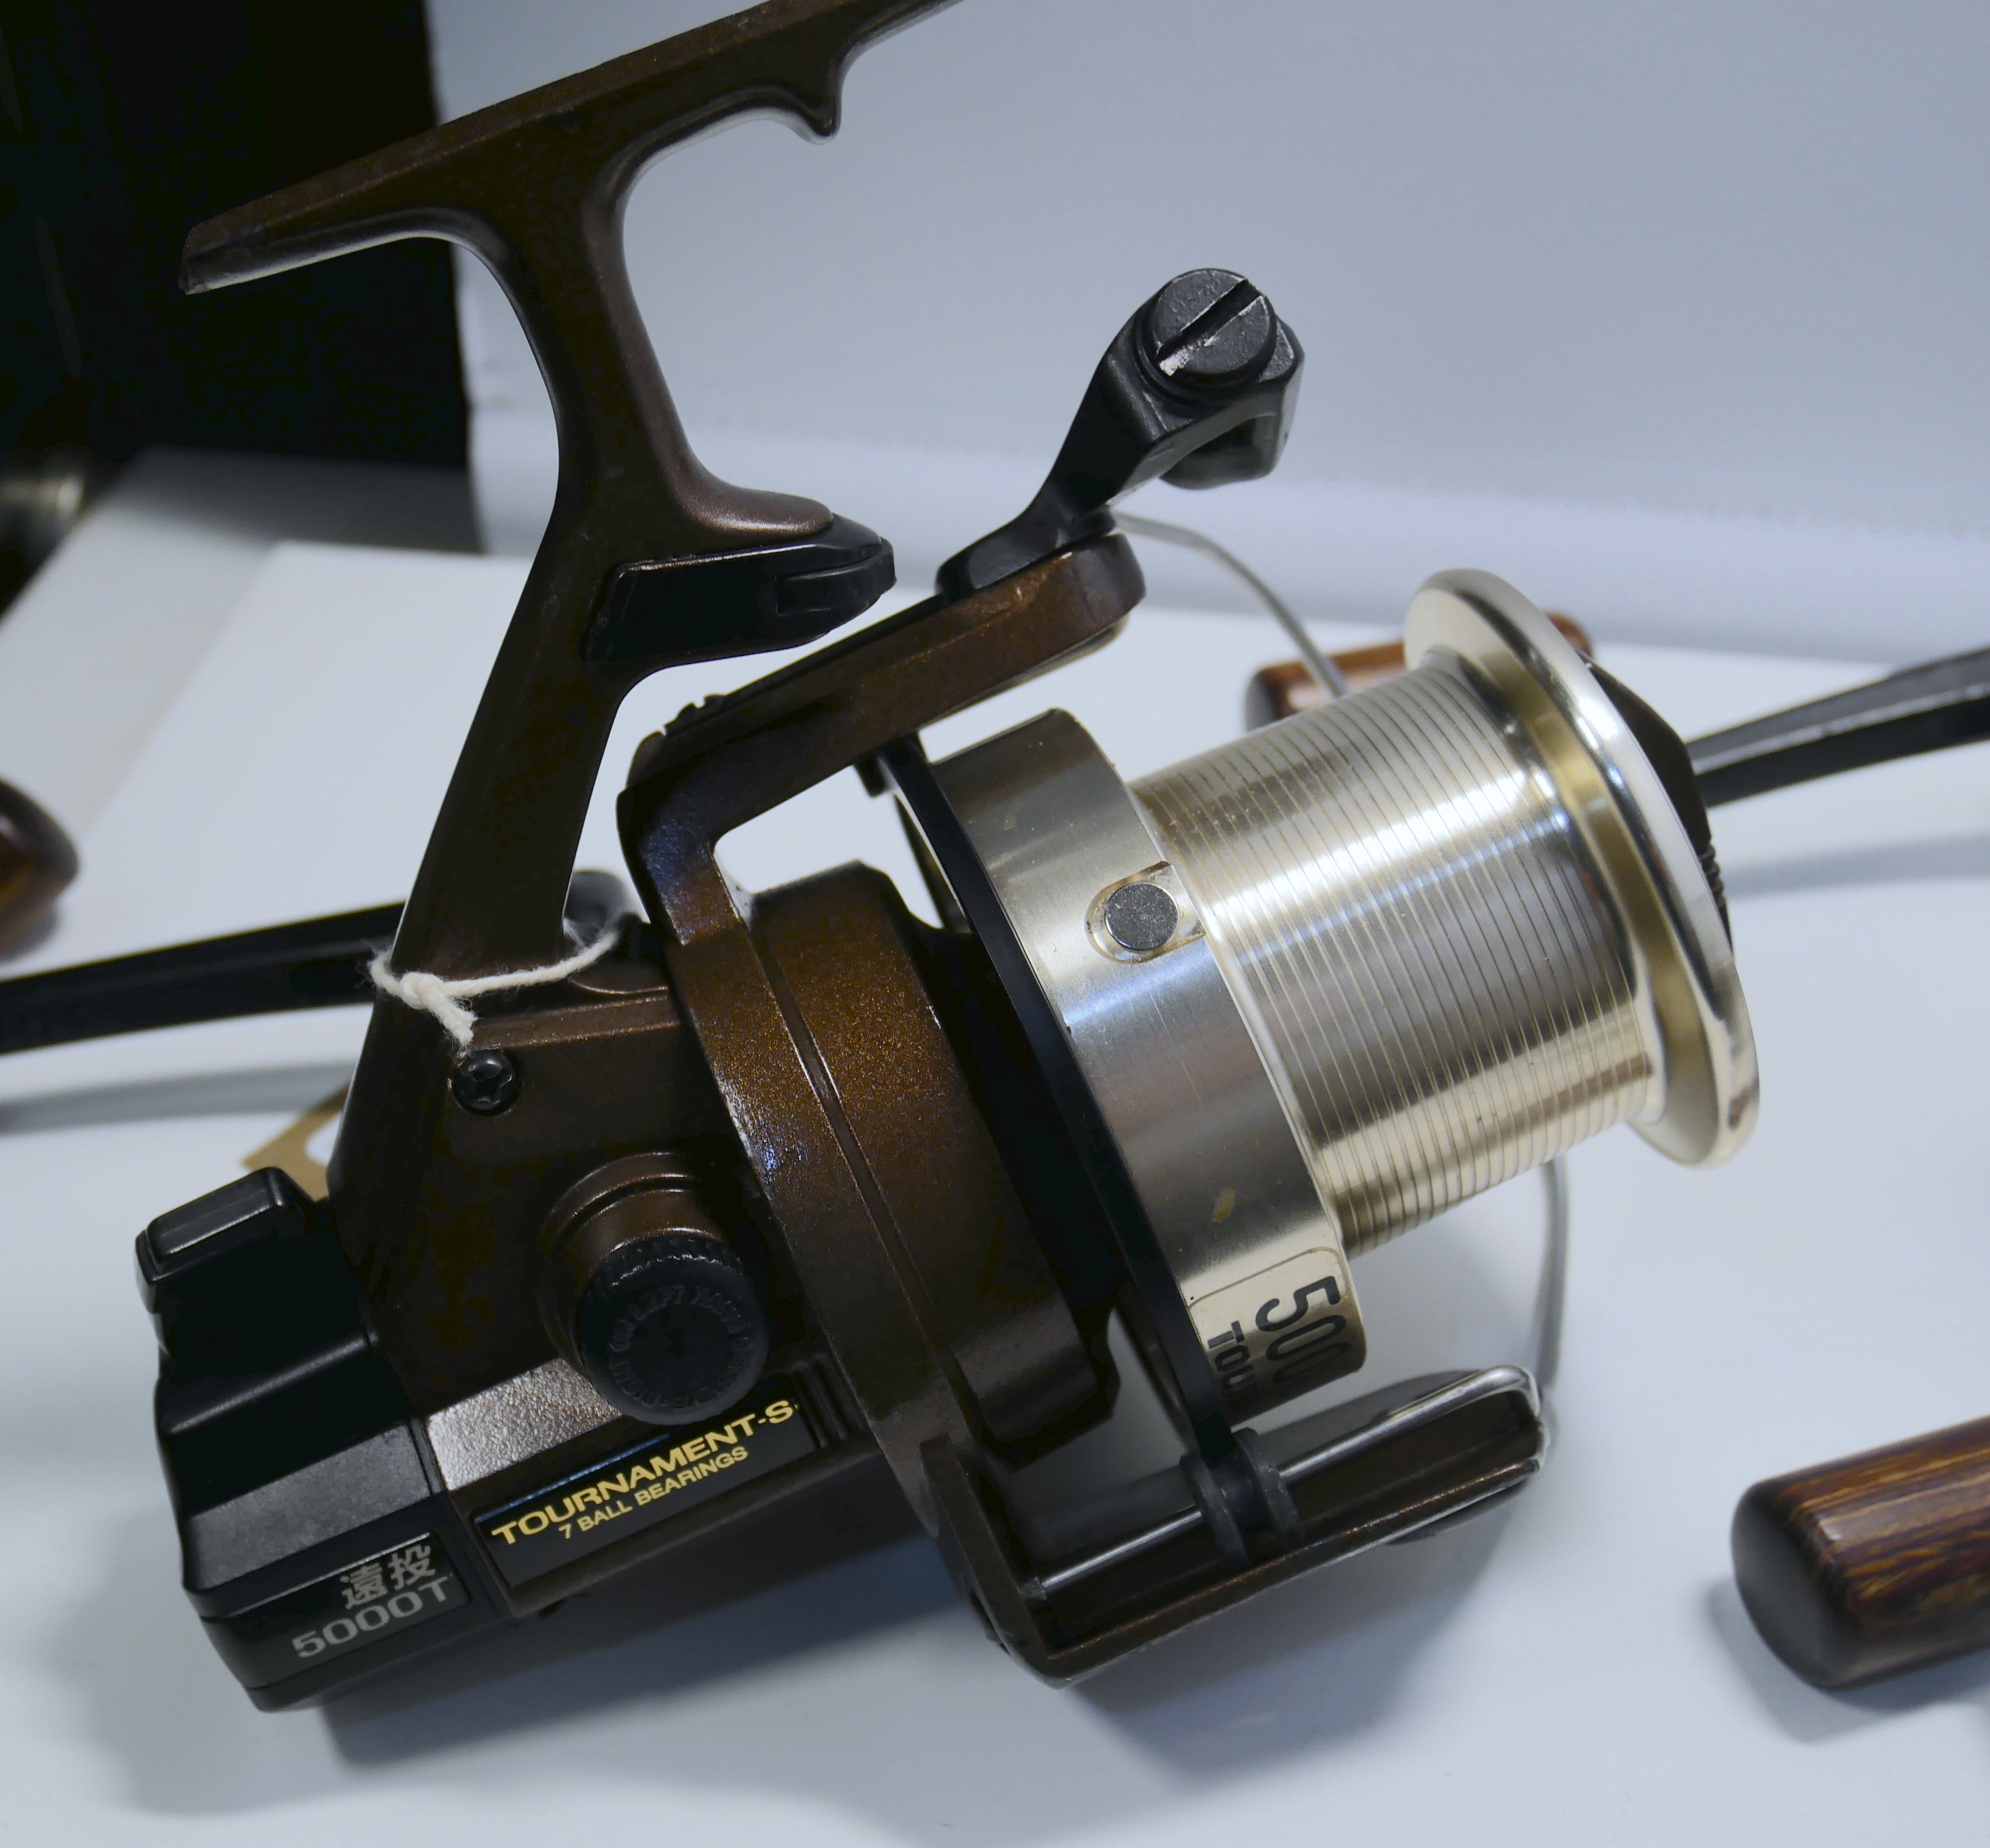 DAIWA TOURNAMENT 5000 Reels X3 ** This Weekend only** £550.00 - PicClick UK